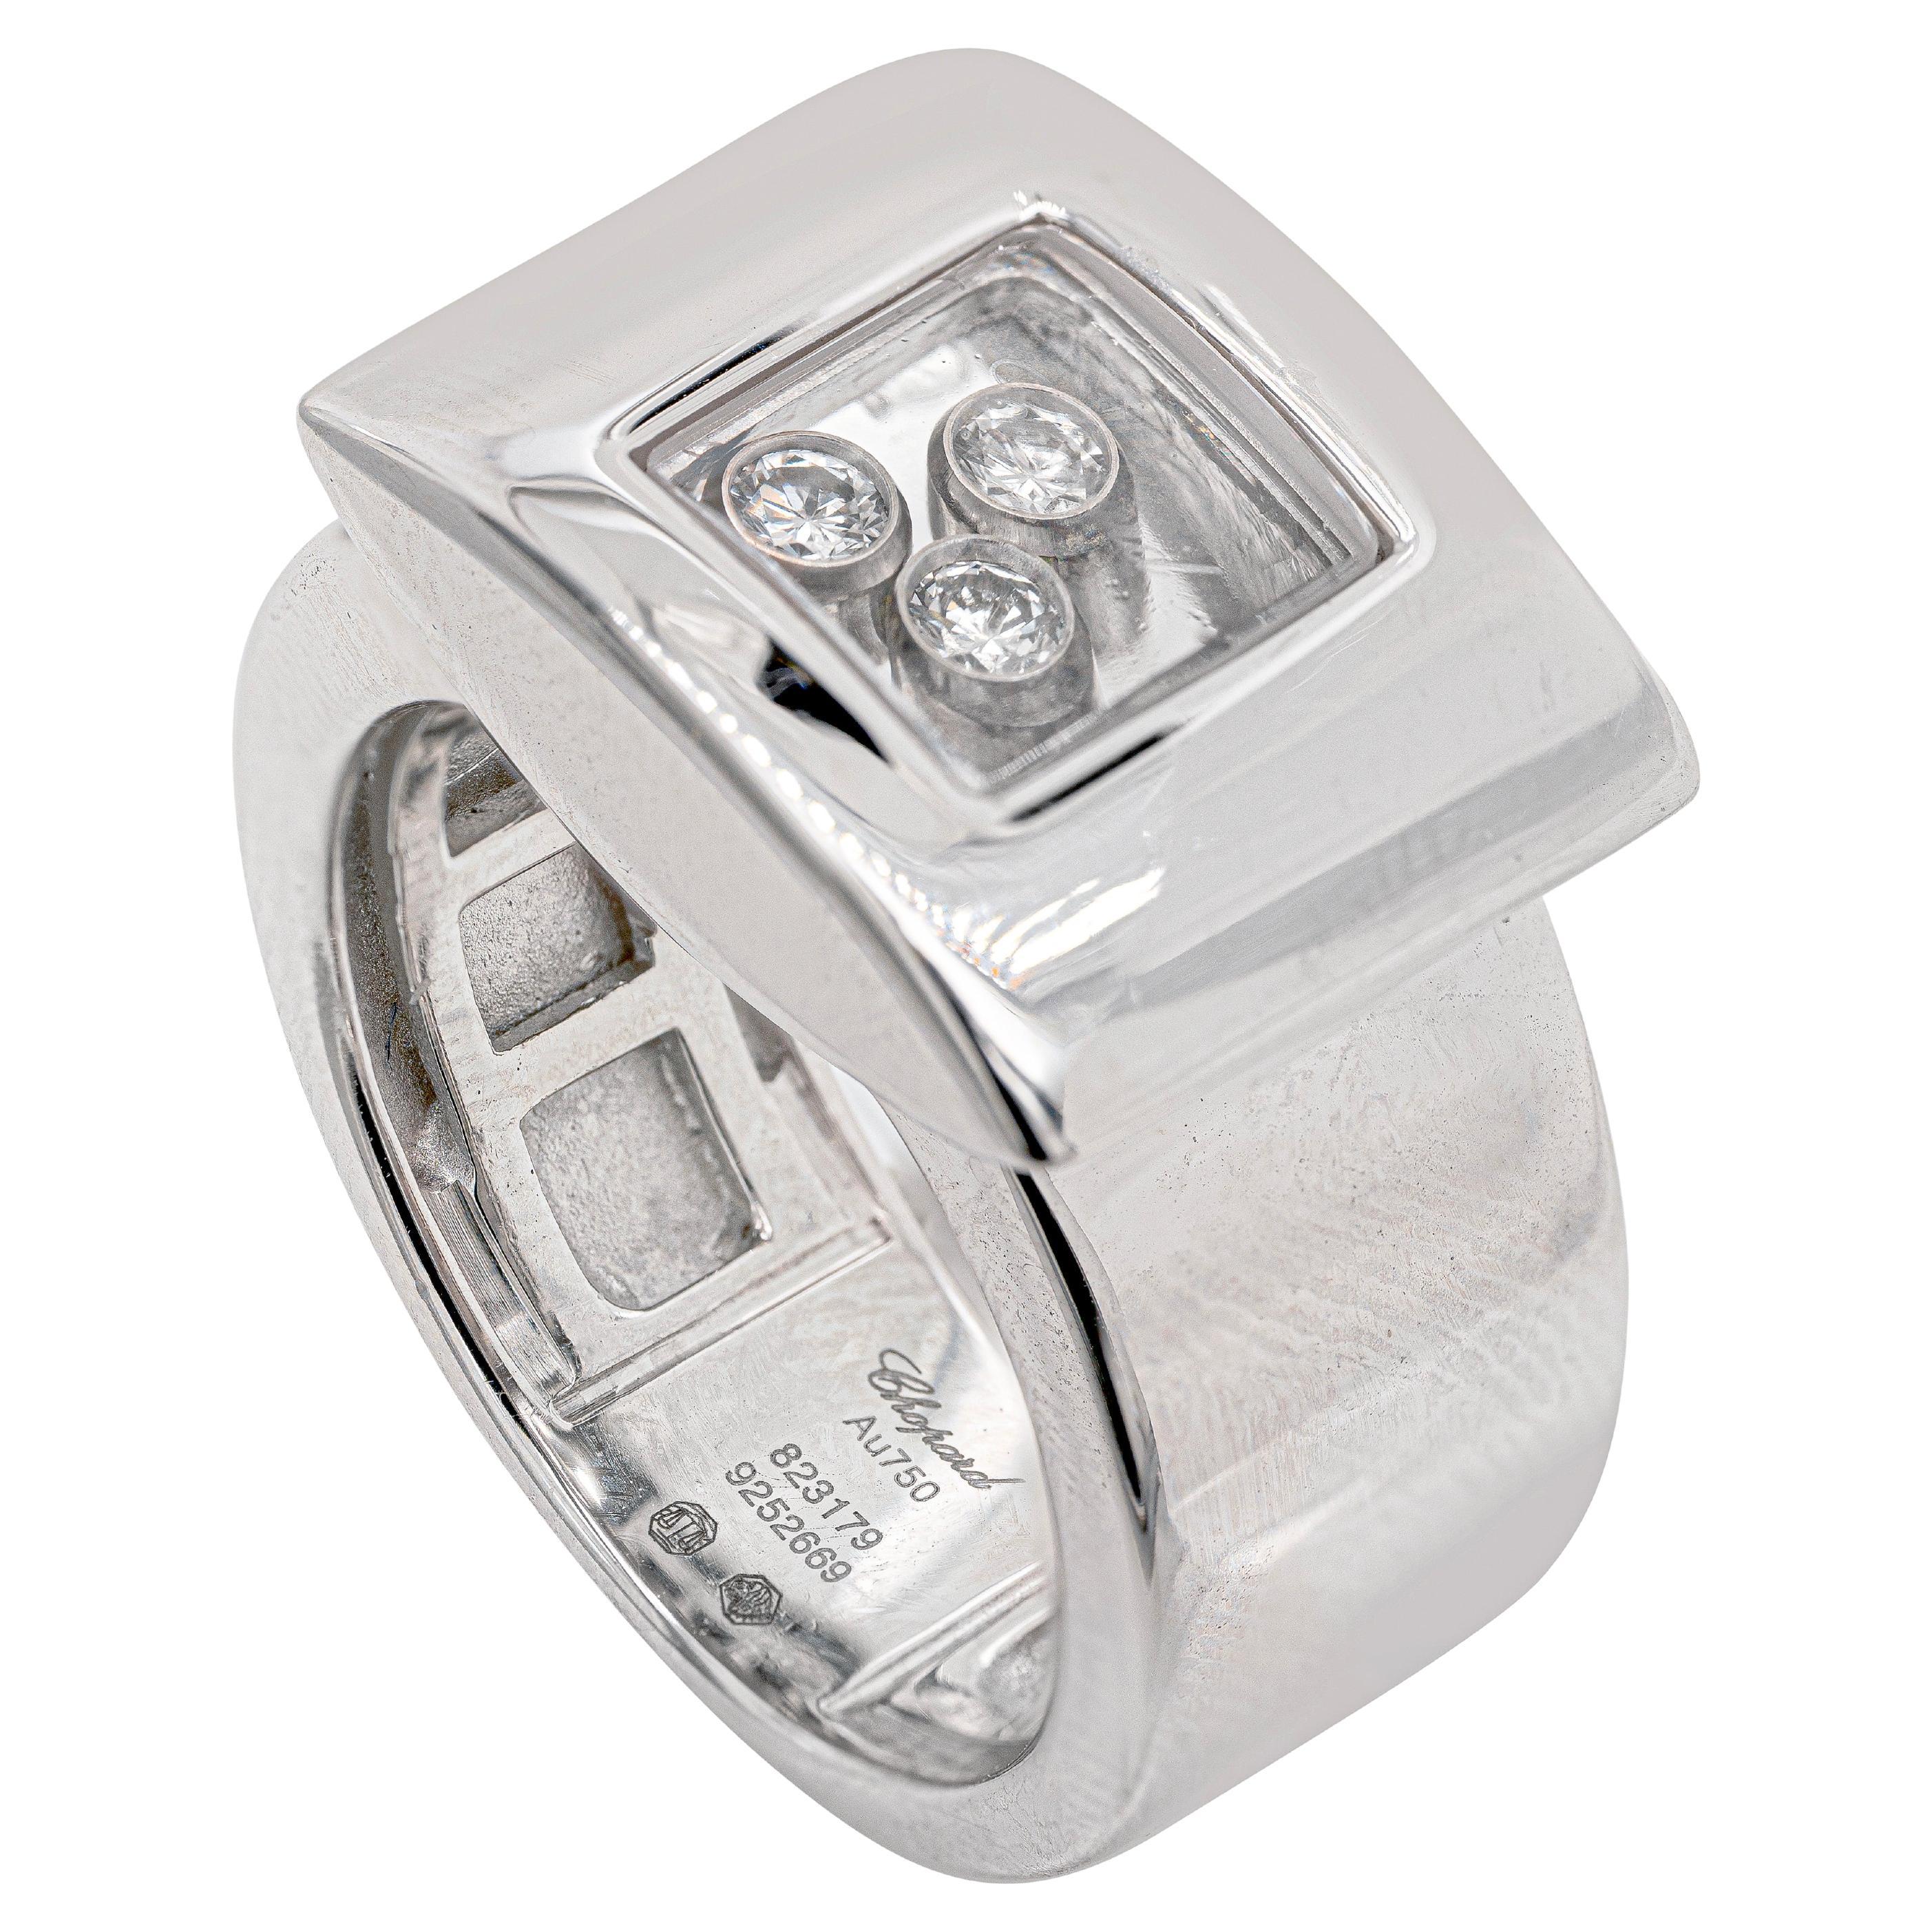 This beautiful 18 carat white gold ring from the iconic Chopard Happy Curves collection features an elegant rectangular motif measuring 12.3 x 16.6mm. Set in the centre of the geometric frame are 3 mobile 'happy diamonds' enclosed between a pair of